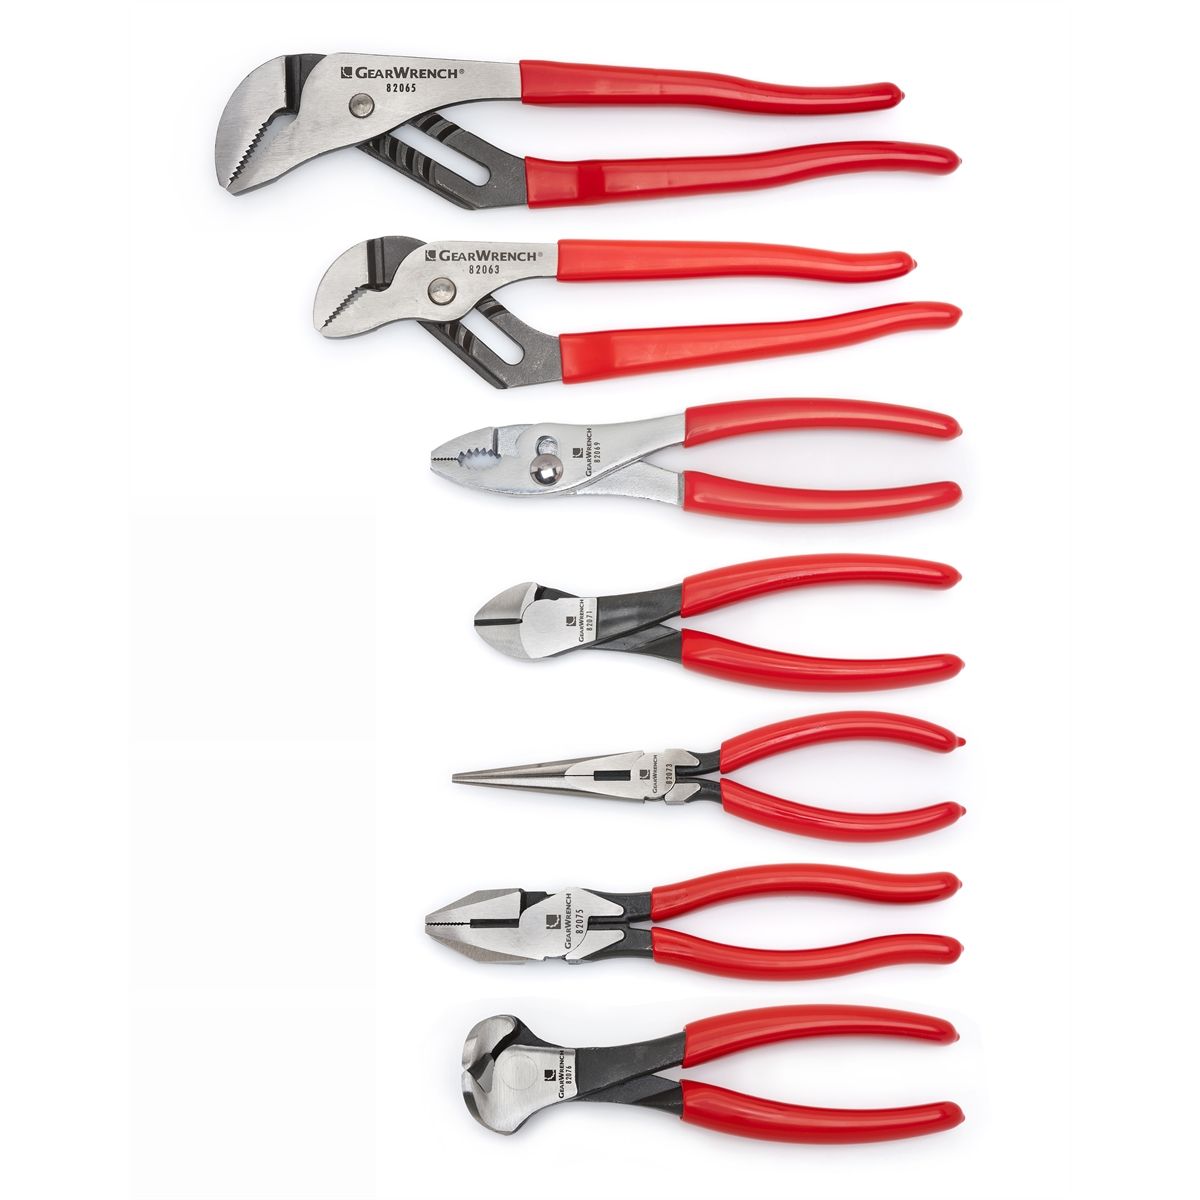 Mixed Dipped Handle Pliers Set 7 Pc